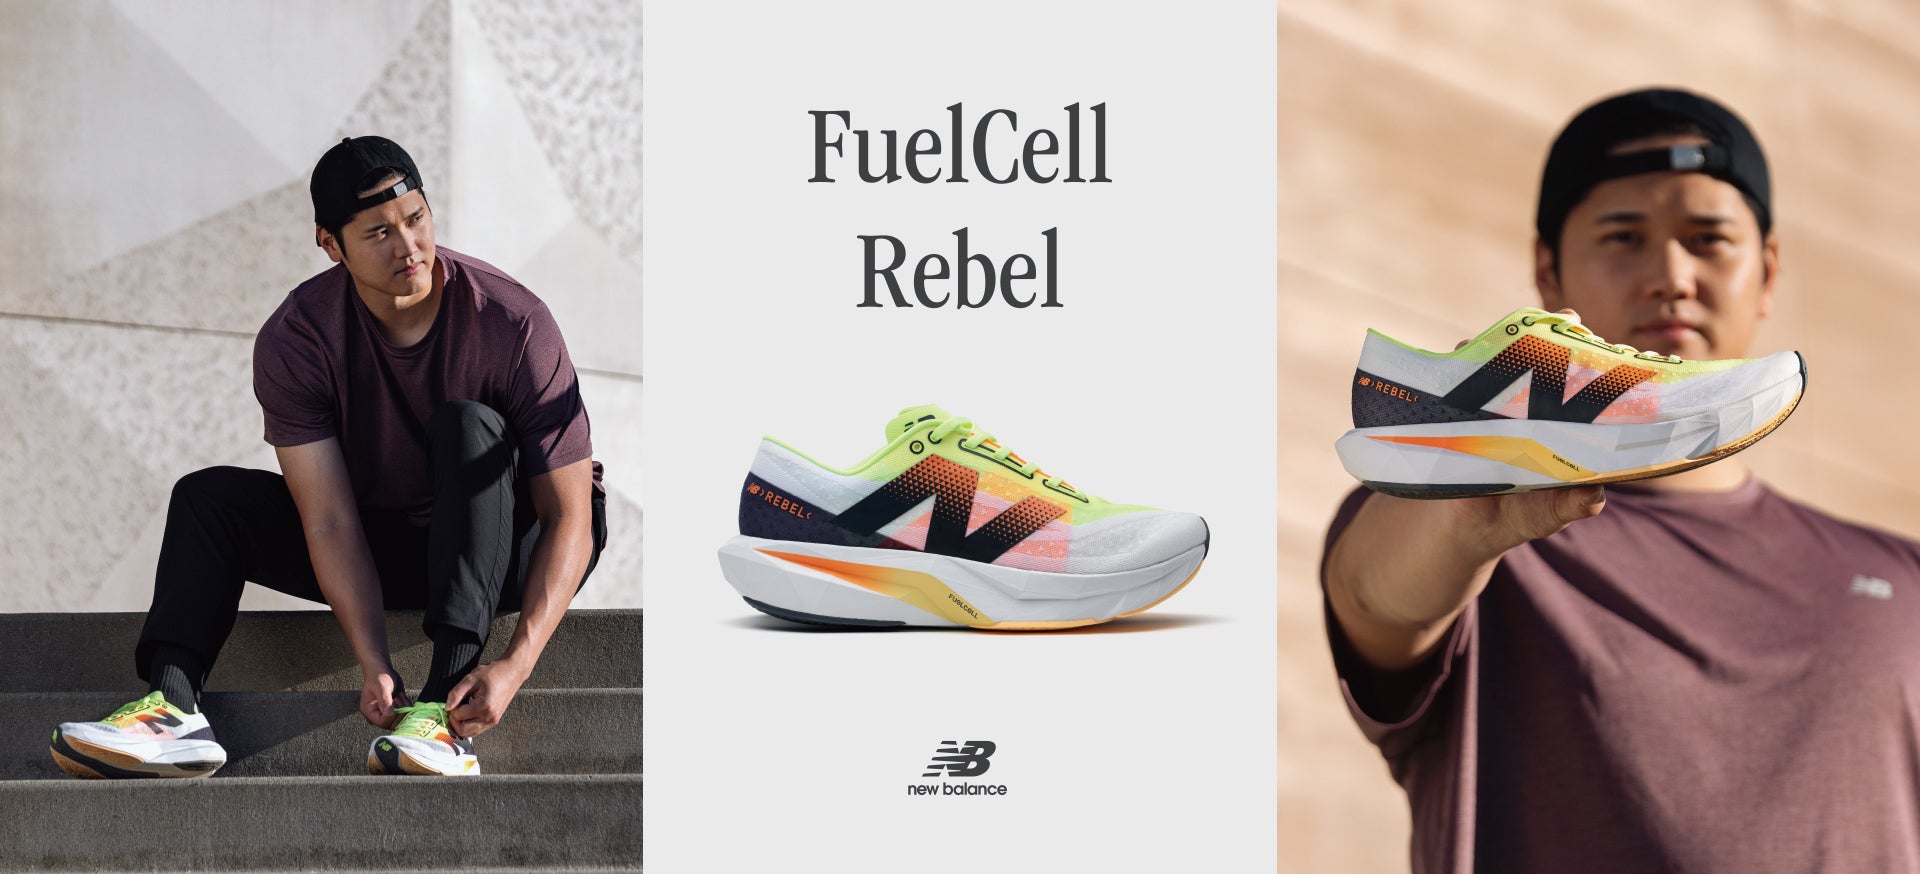 FuelCell Rebel JĕI pACeB